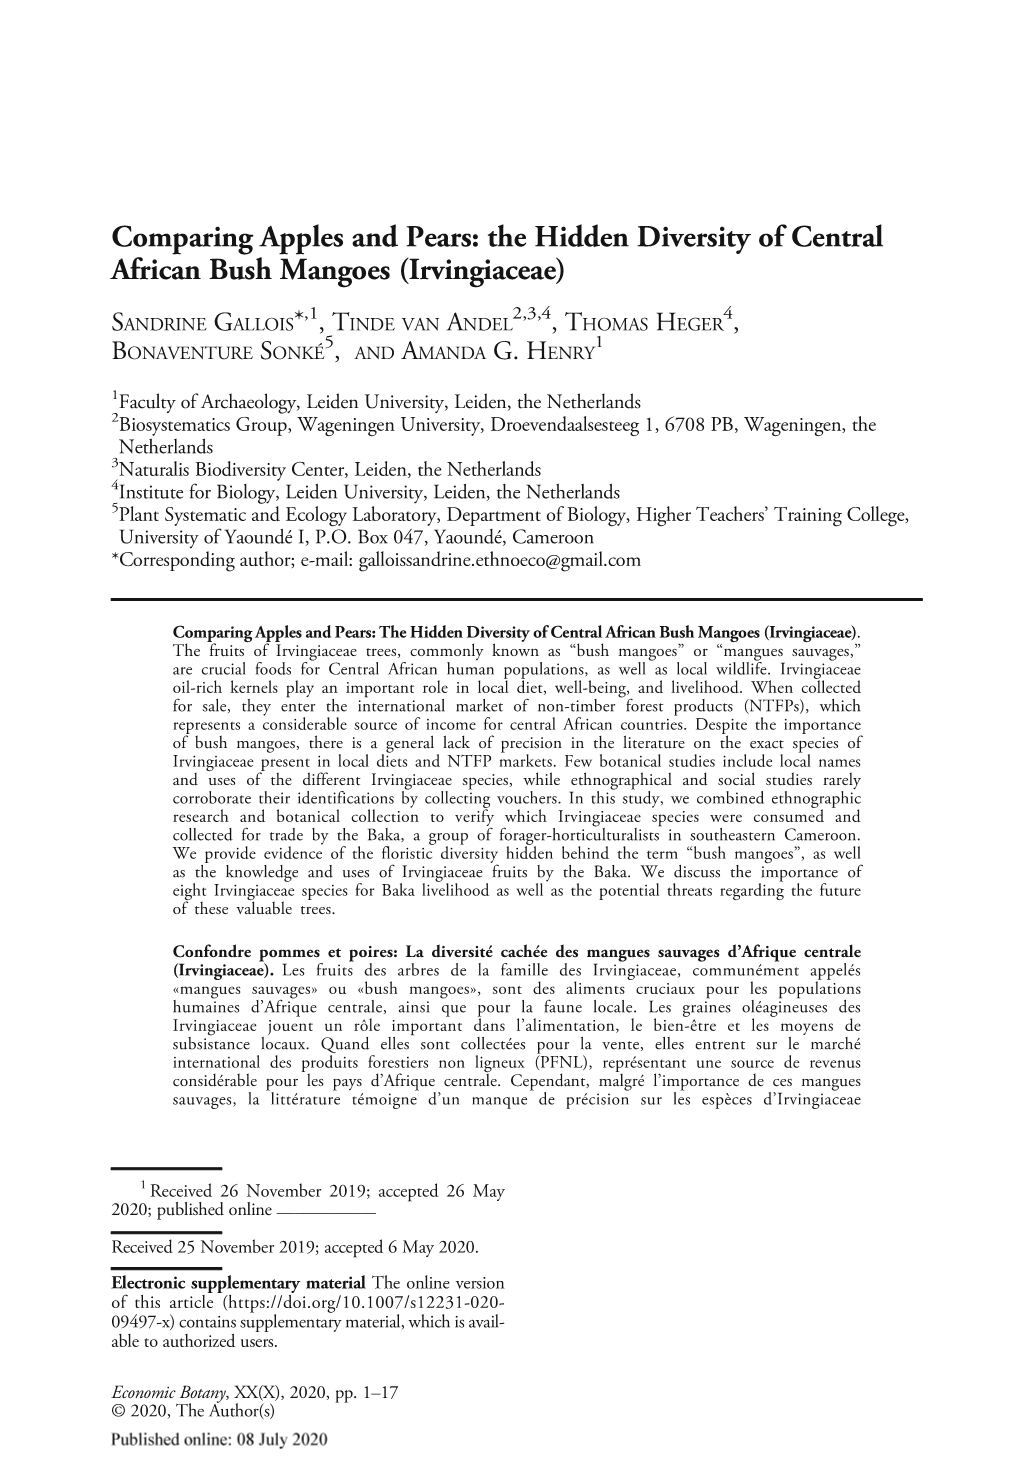 The Hidden Diversity of Central African Bush Mangoes (Irvingiaceae)